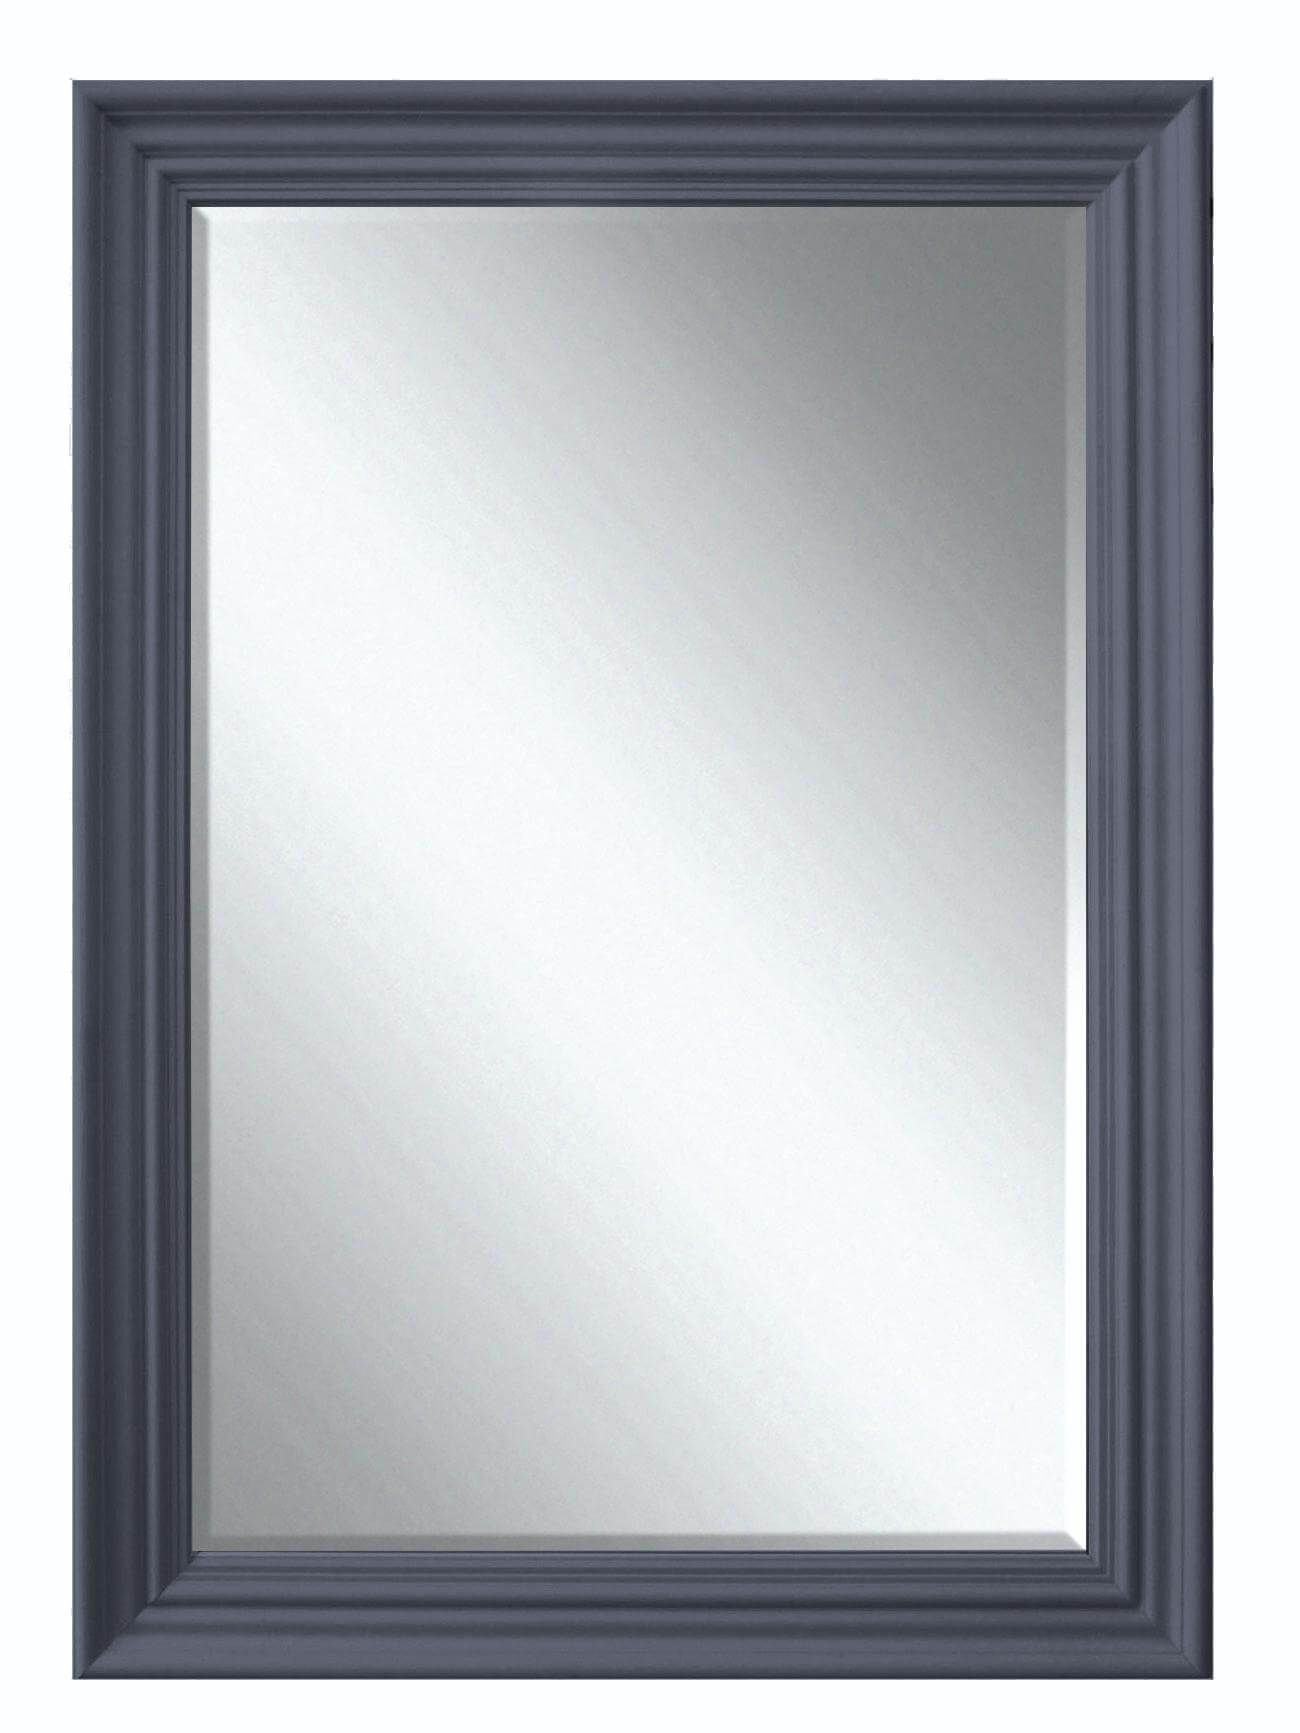 Heritage Edgeware Slate Grey Wooden Framed Mirror 660 X 910mm In Gray Wall Mirrors (View 11 of 15)